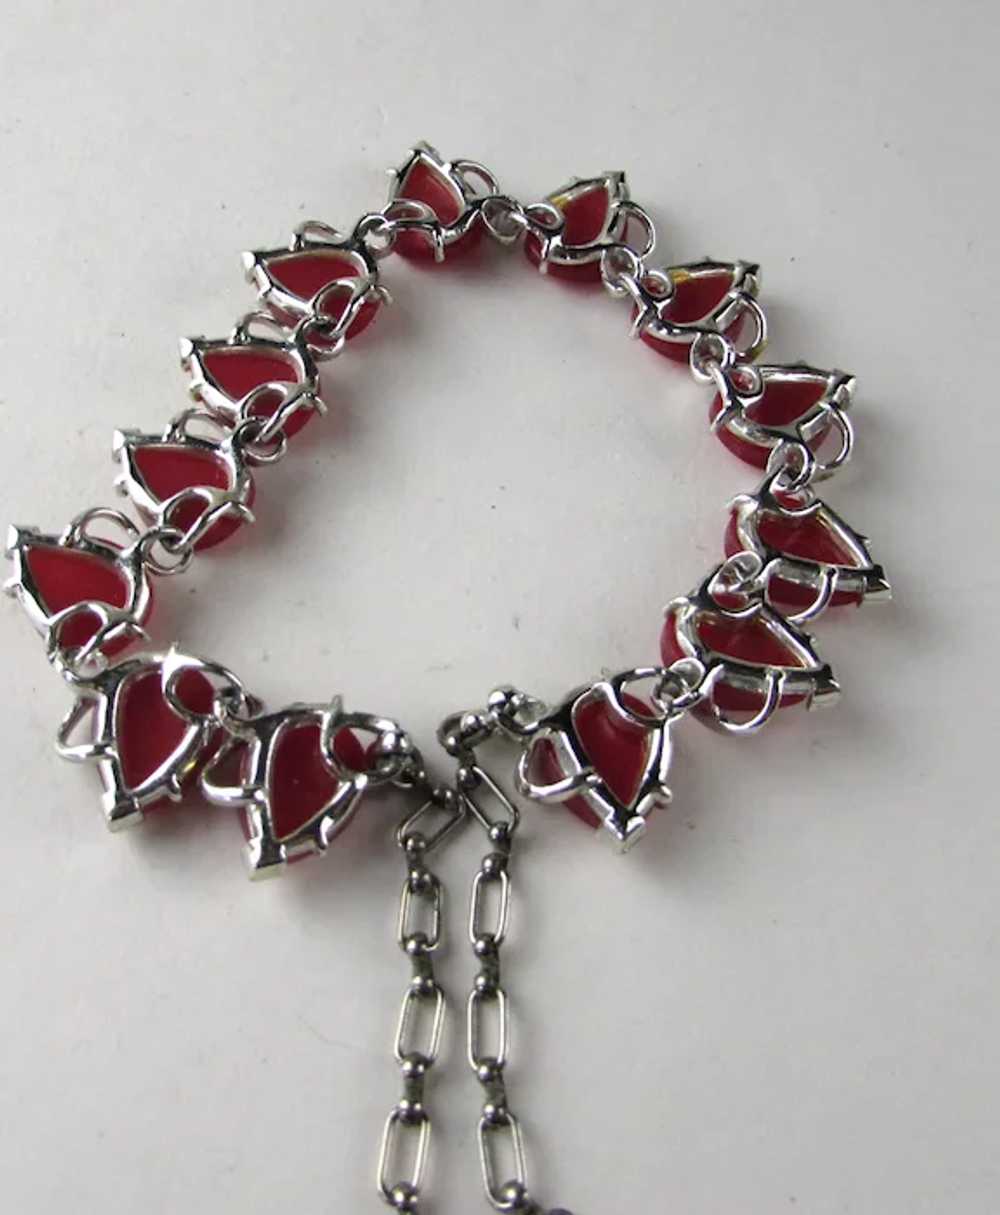 Vintage Red Thermoset Silver Tone Necklace - image 7